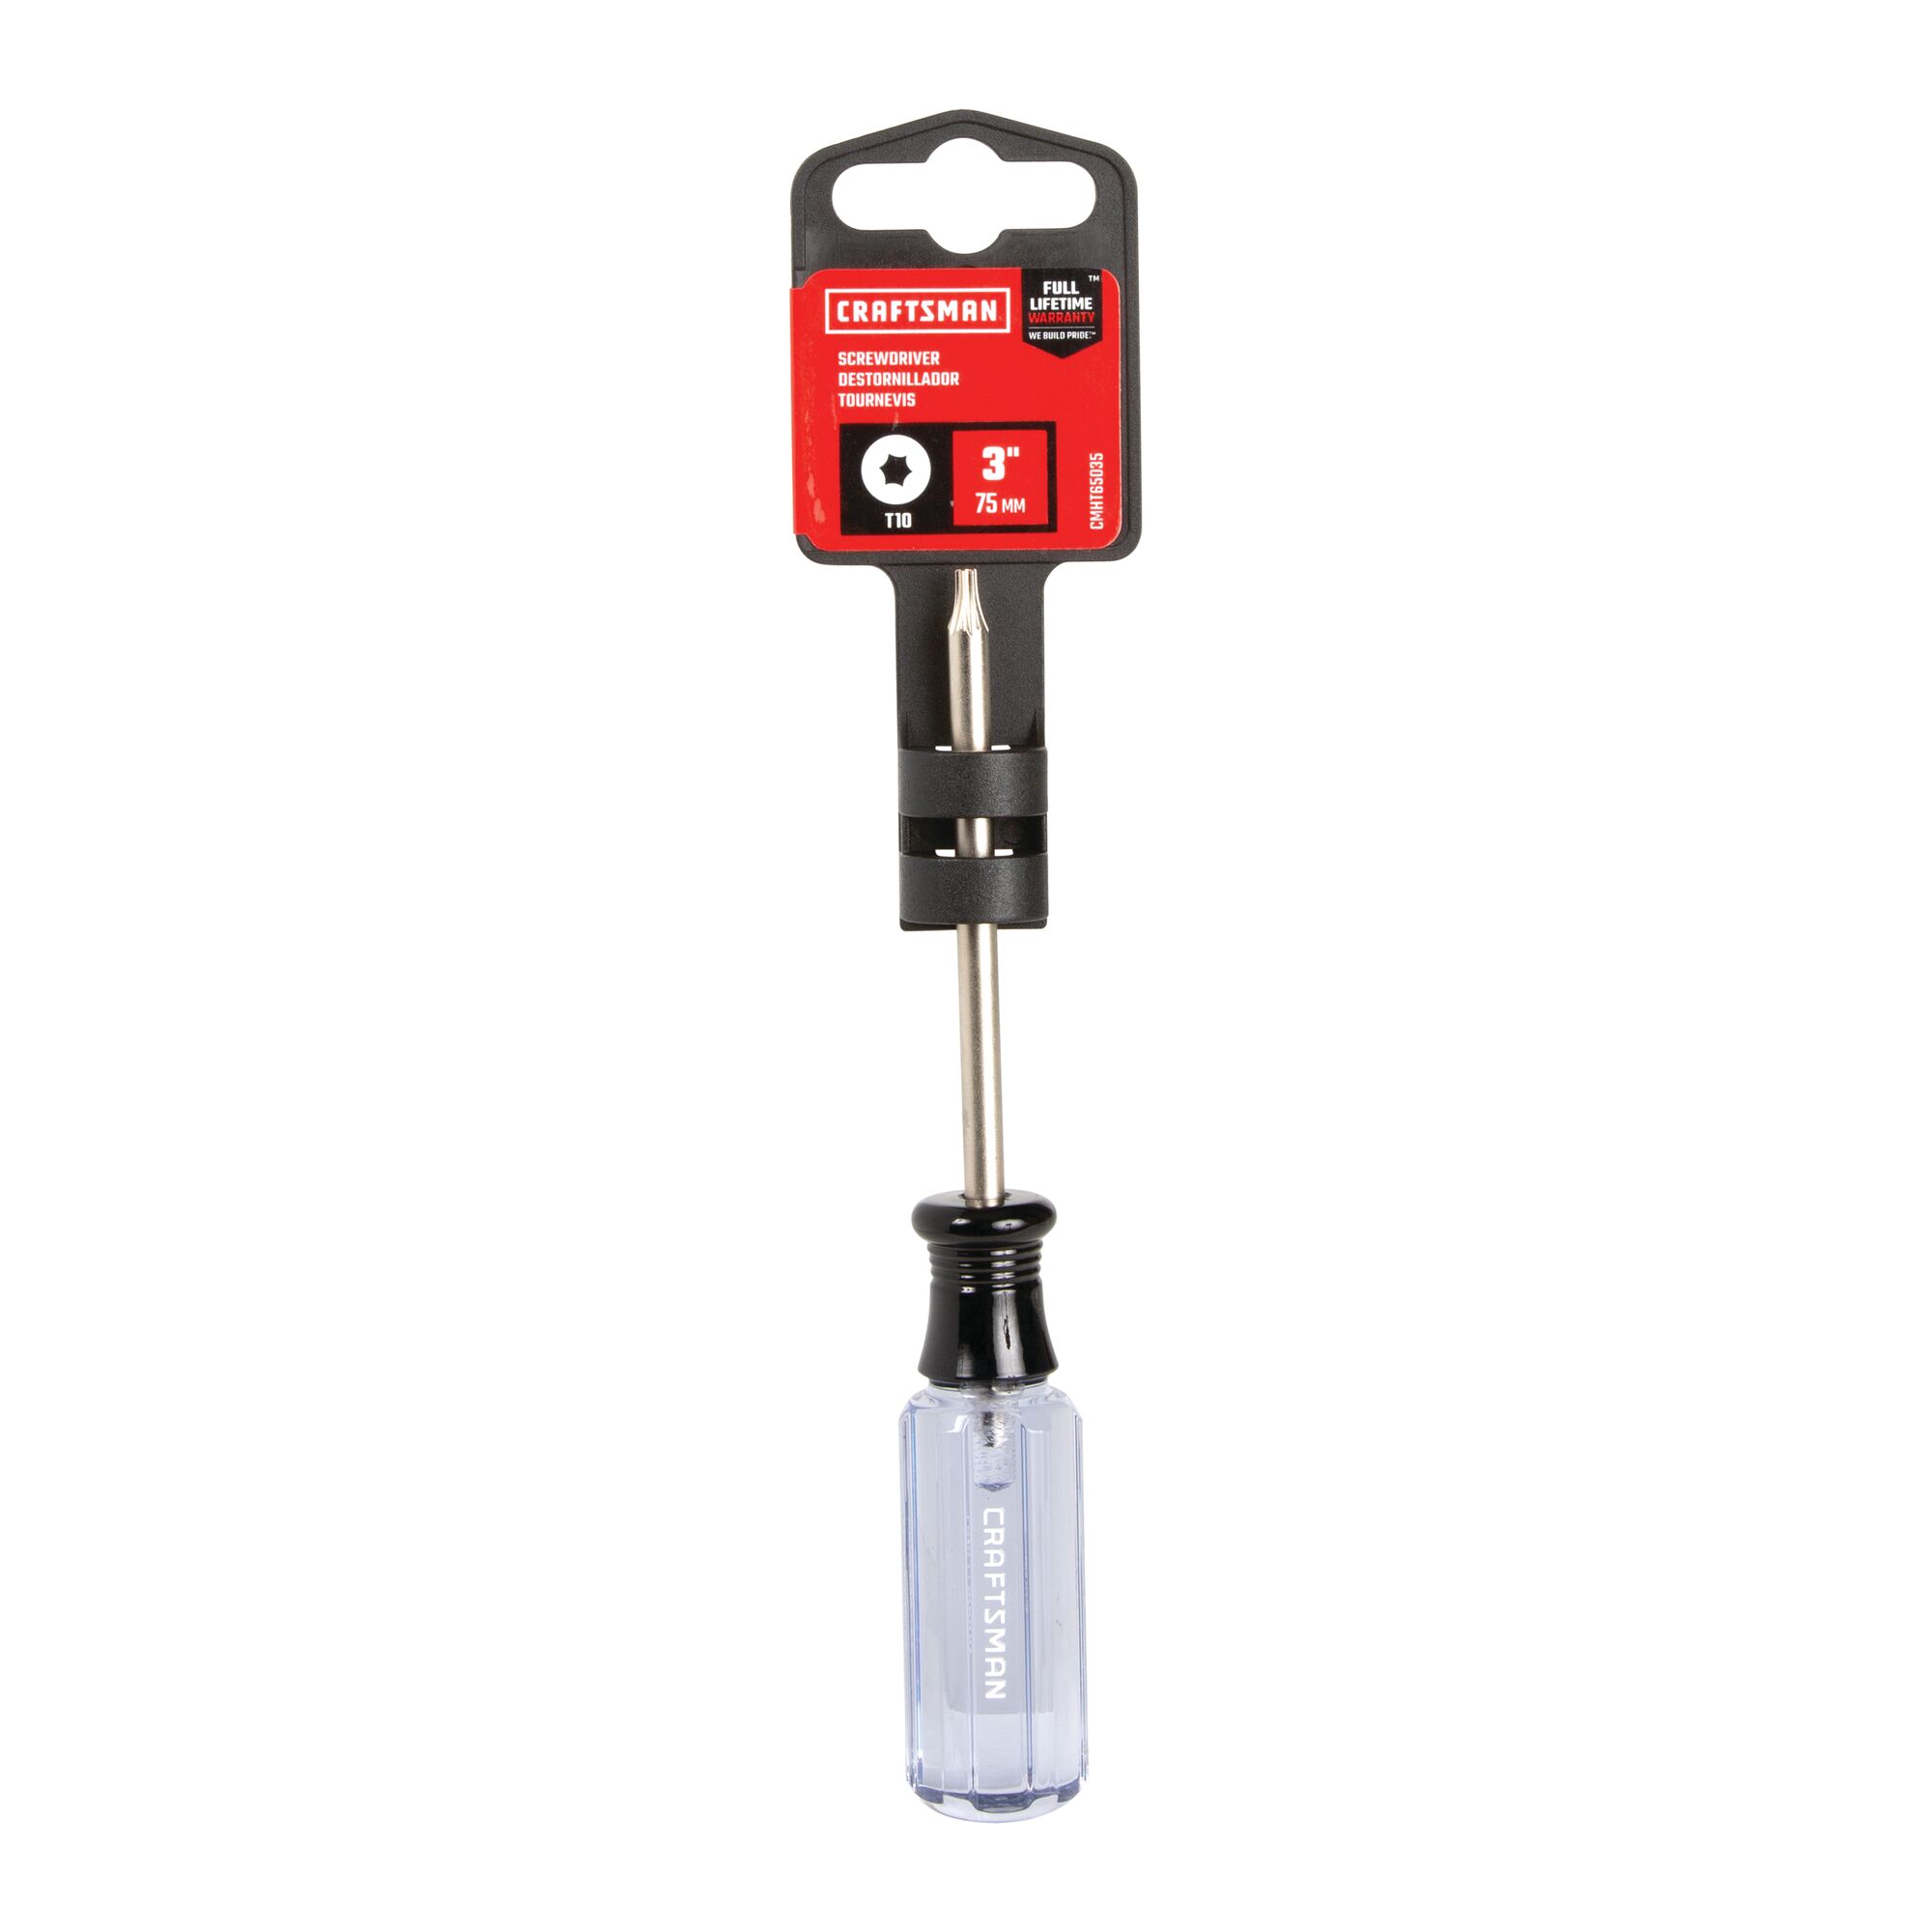 T 10 by 3 inch Acetate ScrewDriver in carded packaging.